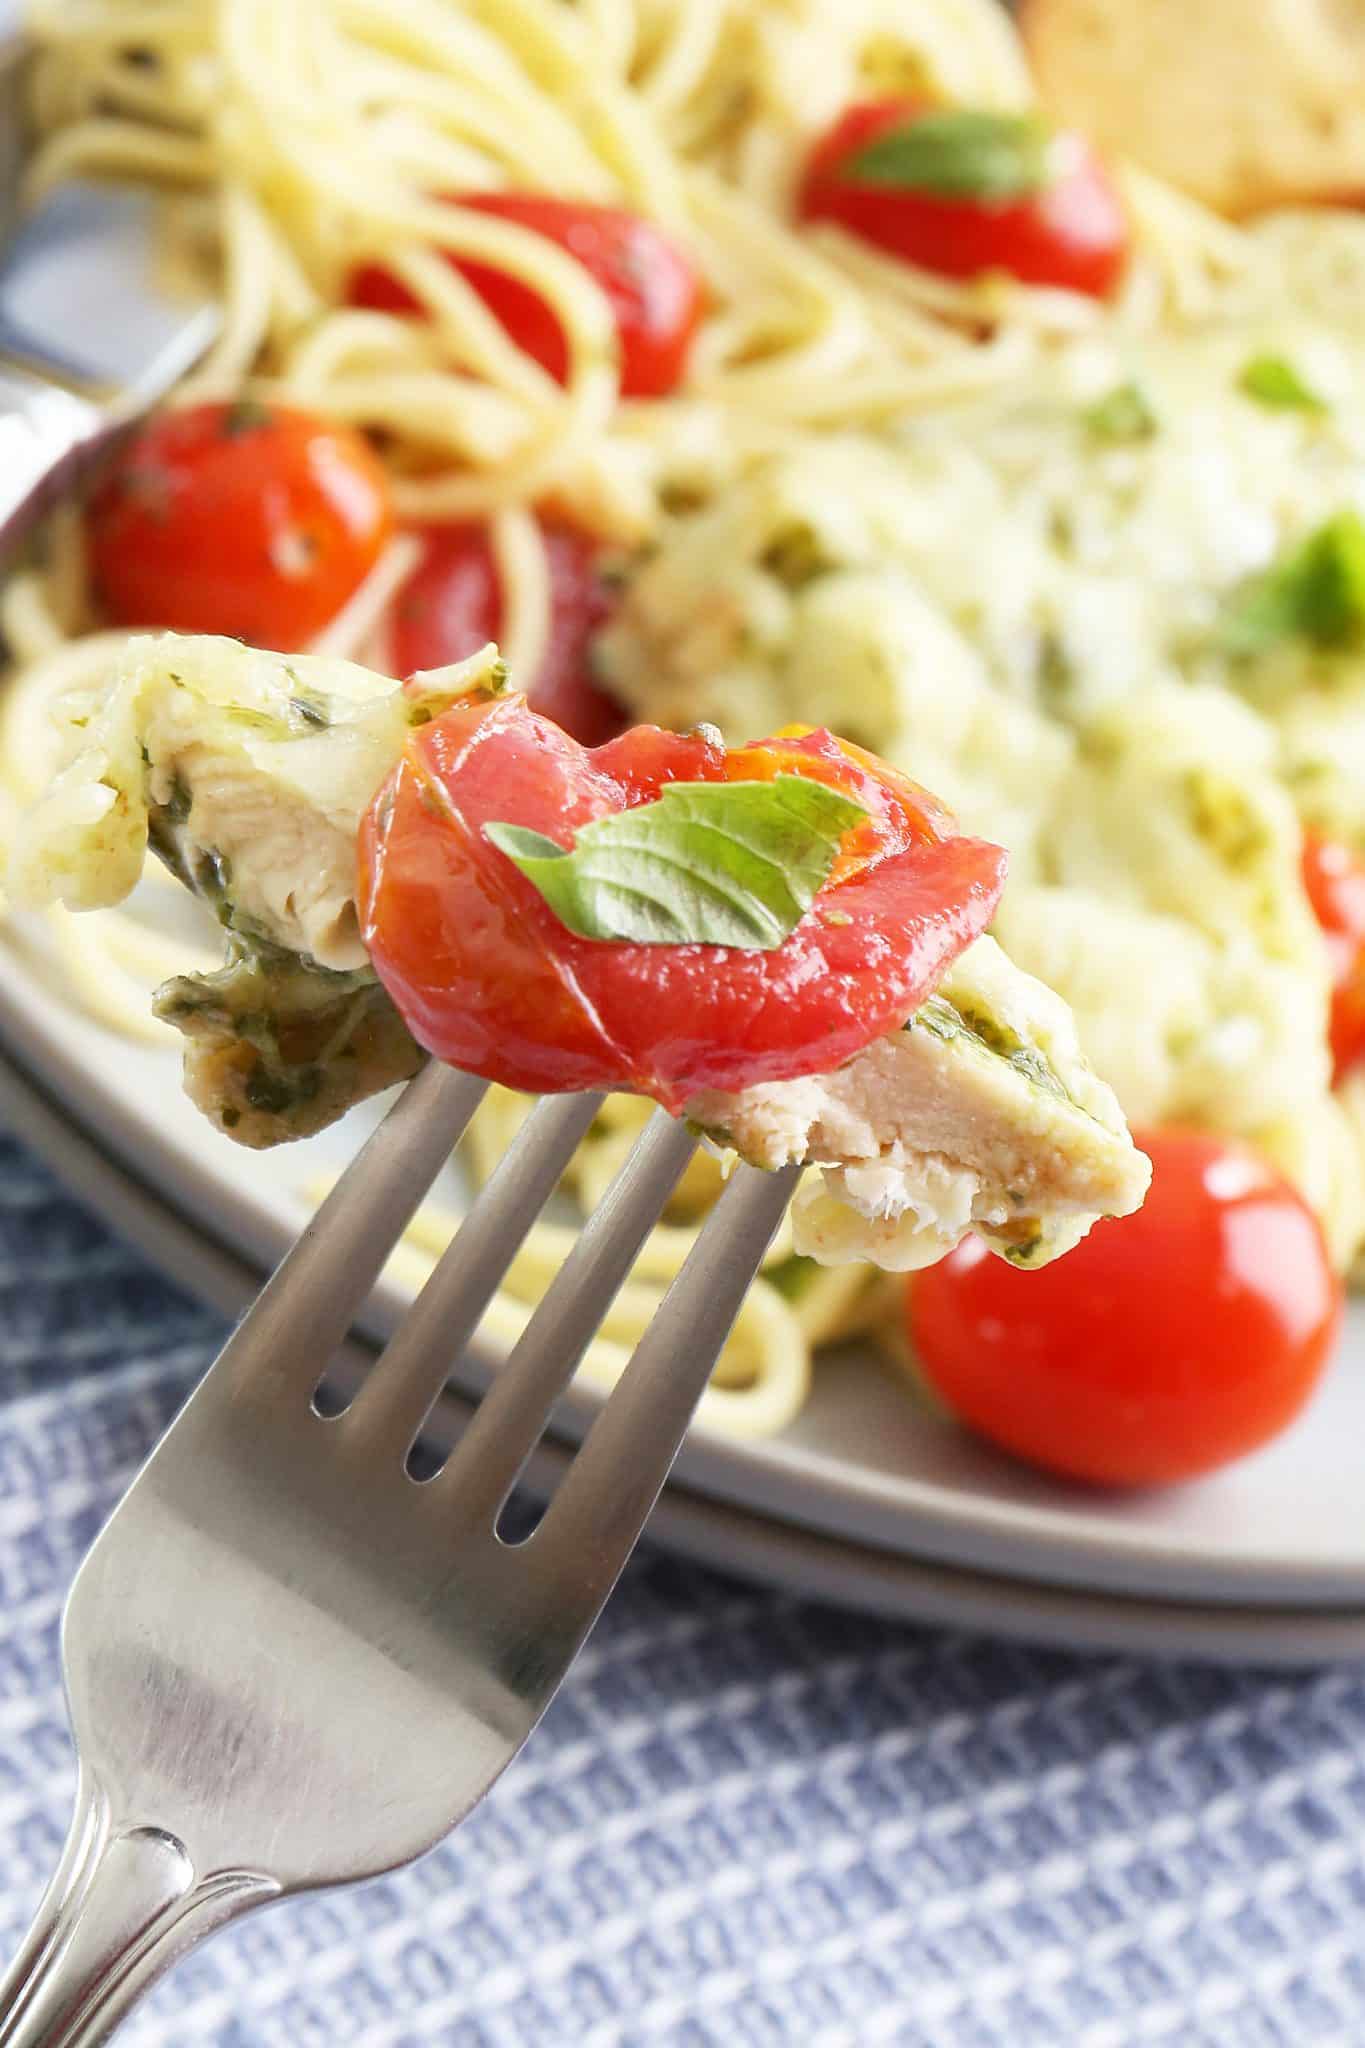 A close up of a bite of pesto chicken with a cherry tomato and small piece of basil on a fork held above the rest of the plate of pesto chicken in the background.